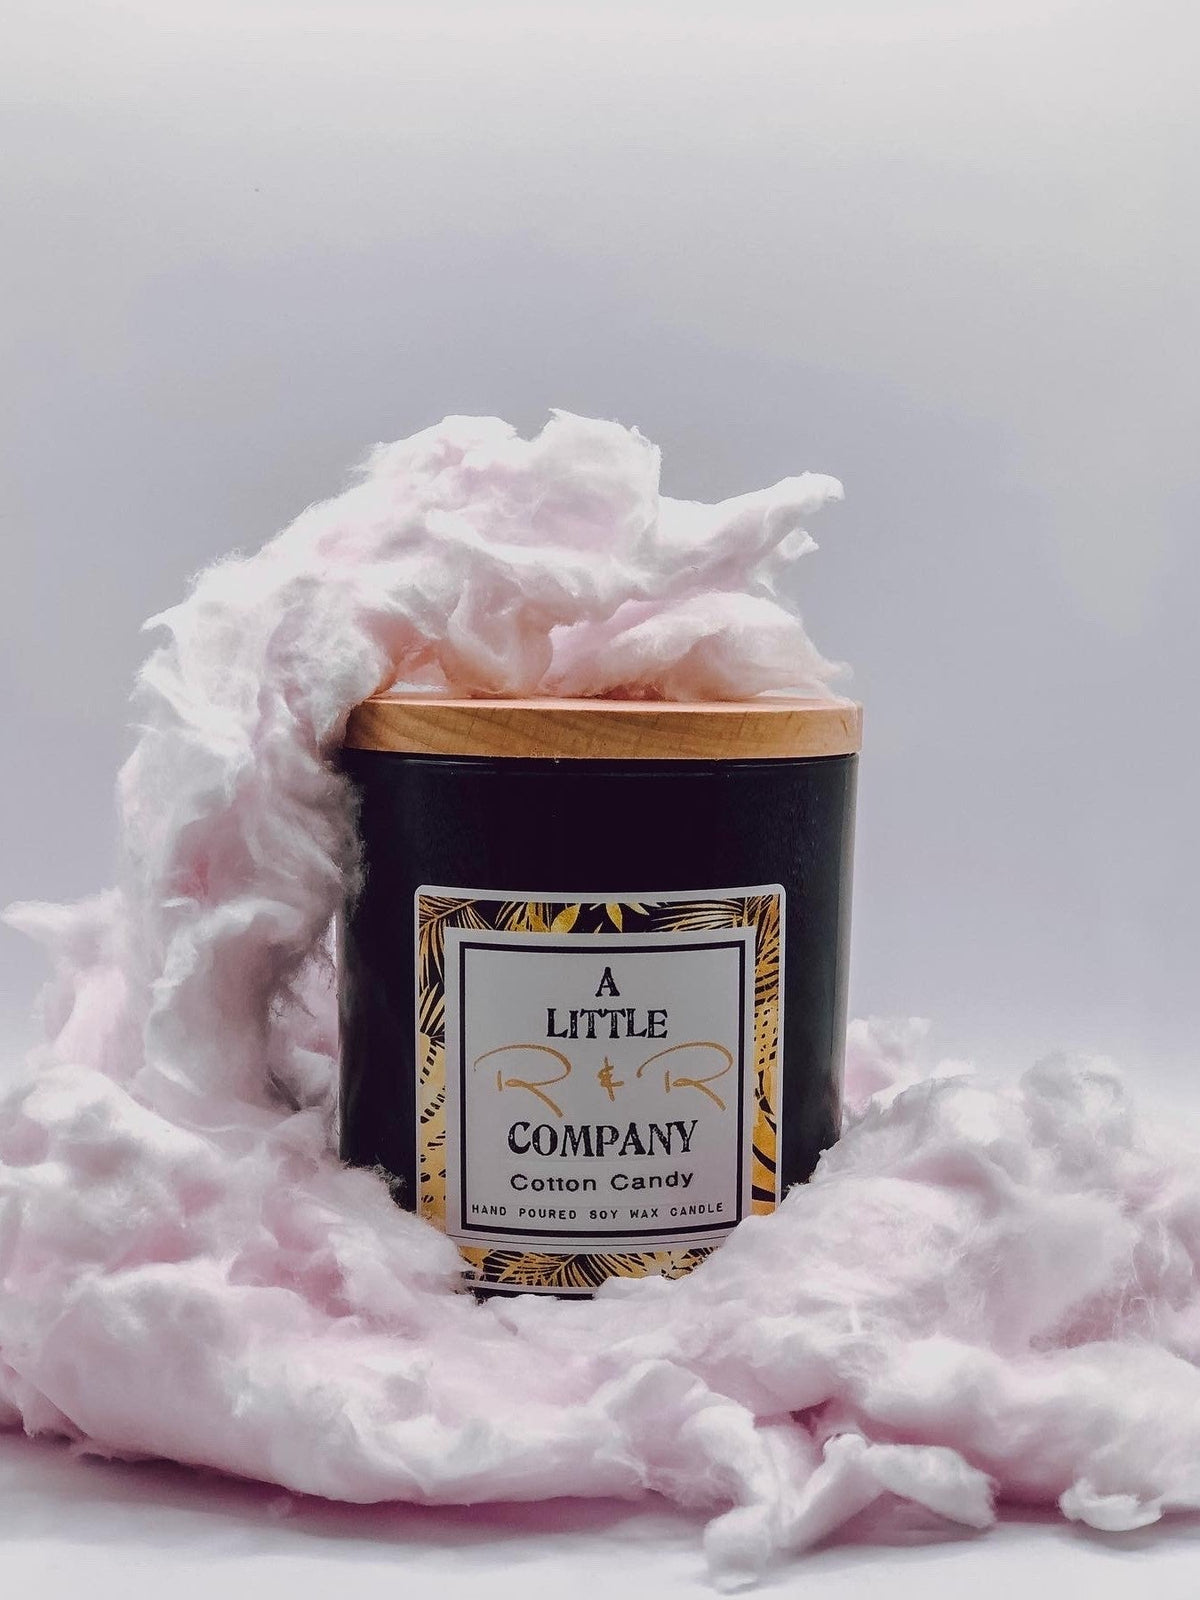 Cotton Candy Handmade Soy Wax Candle - alittlernrcompany